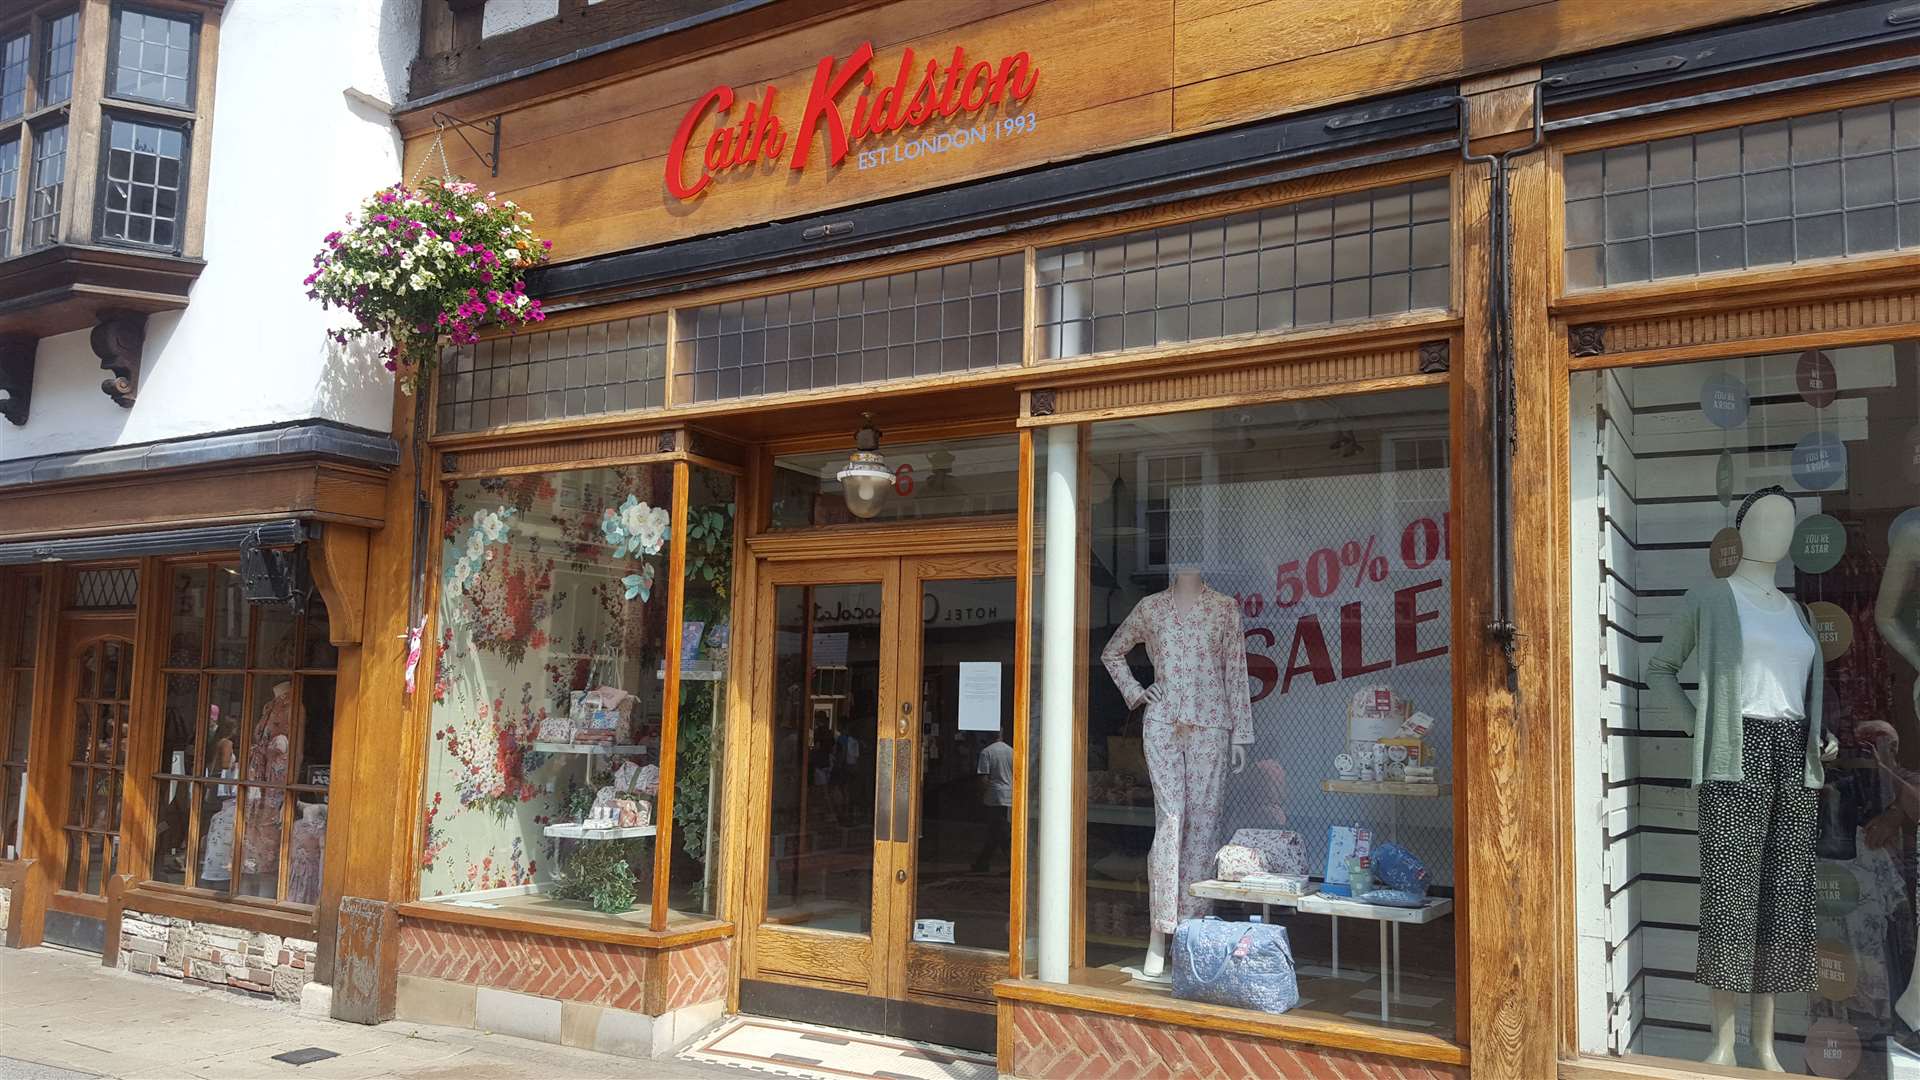 Cath Kidston in Canterbury has closed down, but the unit could soon be filled